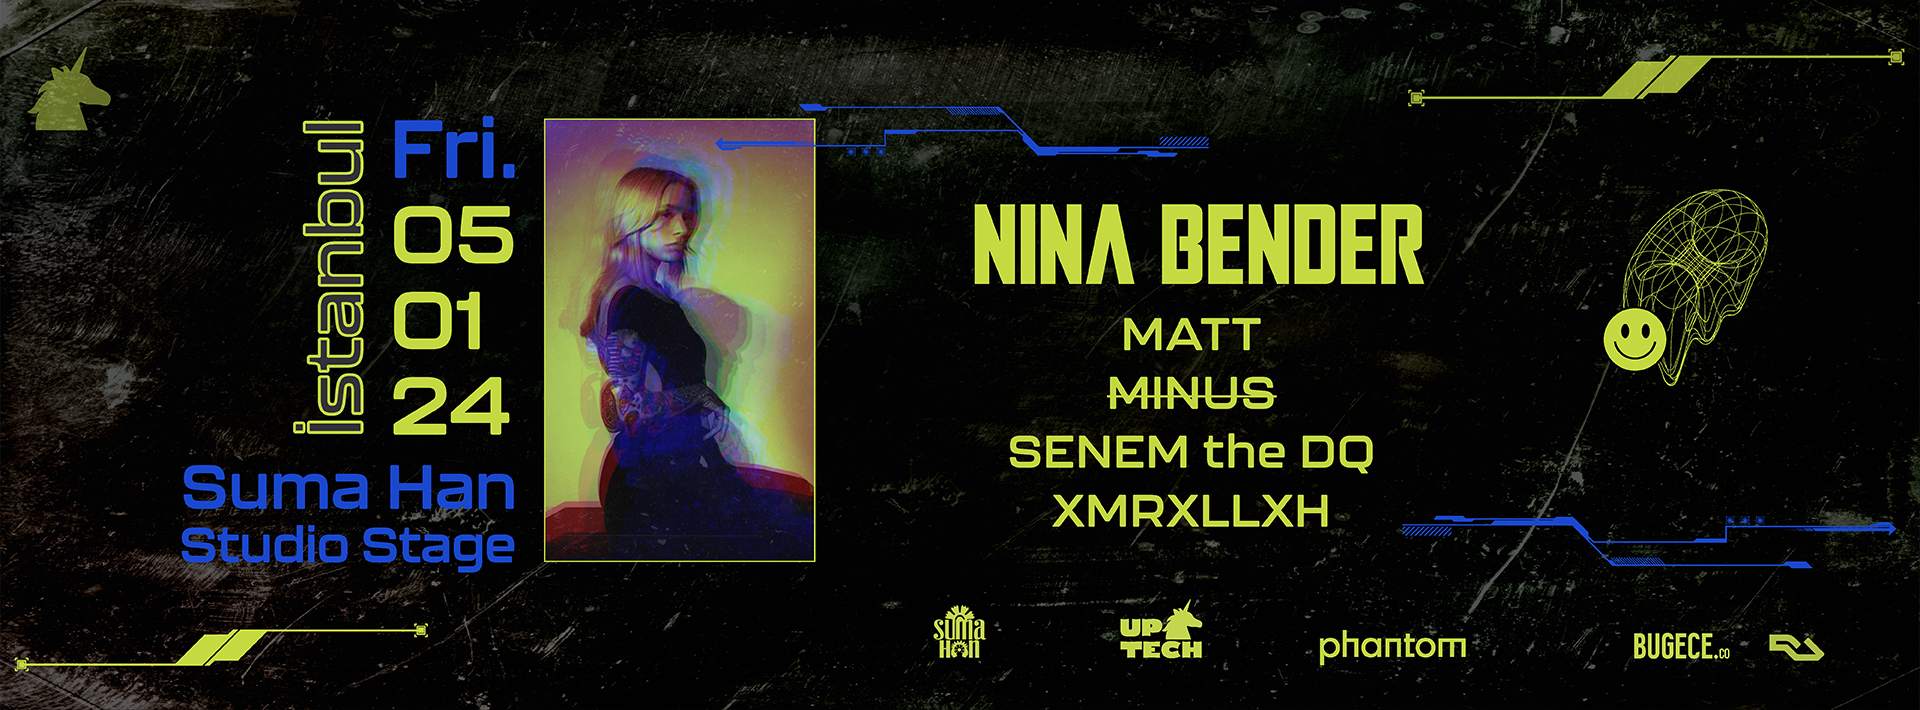 Nina Bender Istanbul by UPTech - フライヤー表